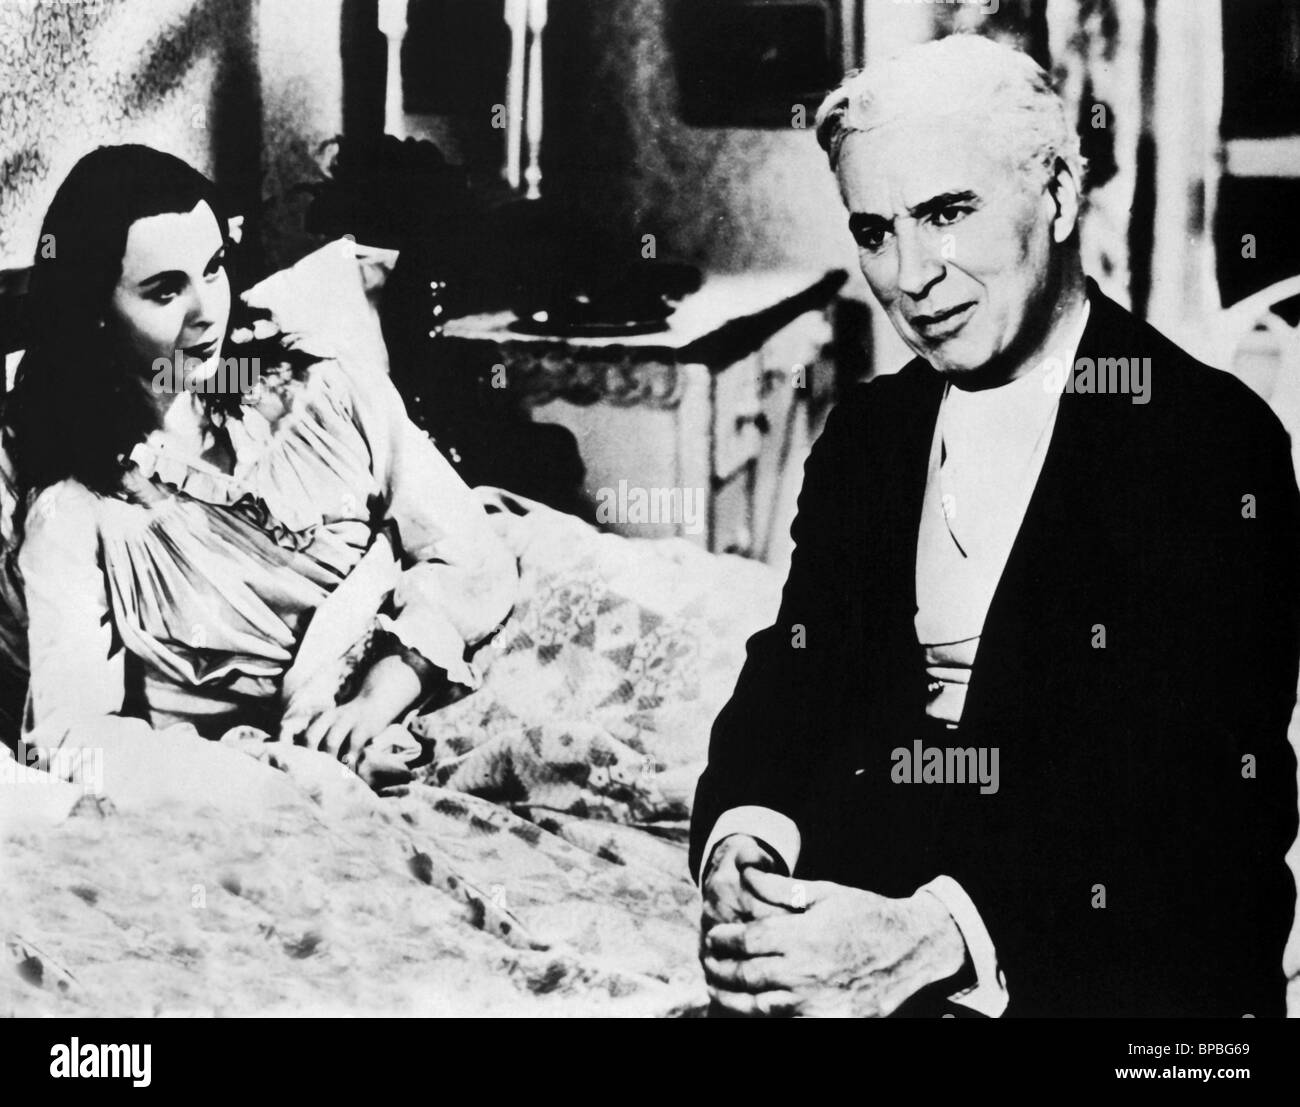 CLAIRE BLOOM, Charlie Chaplin, Limelight, 1952 Stockfoto